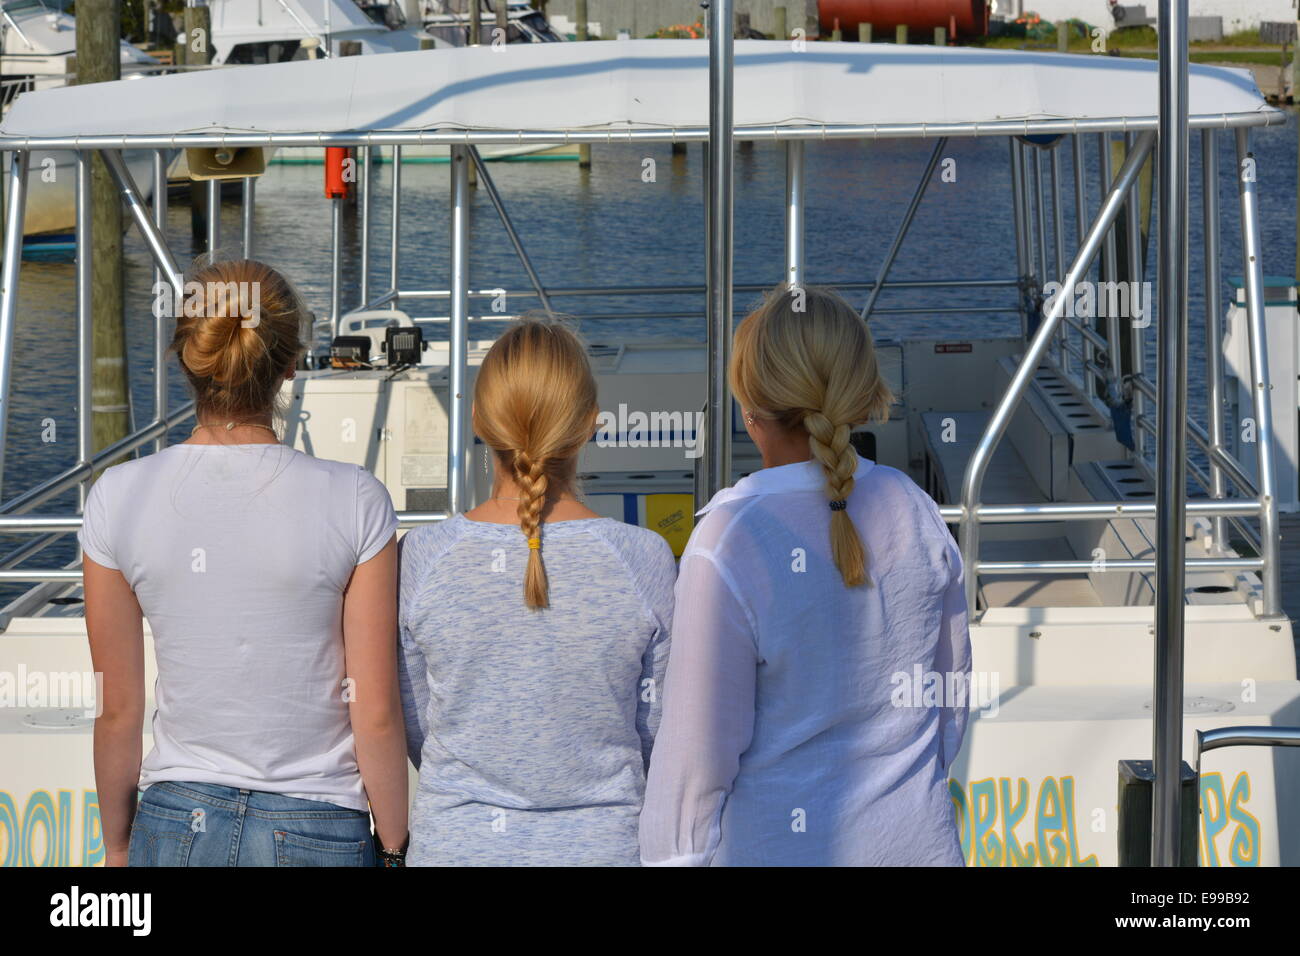 three women looking at boat, carefree hair styles Stock Photo